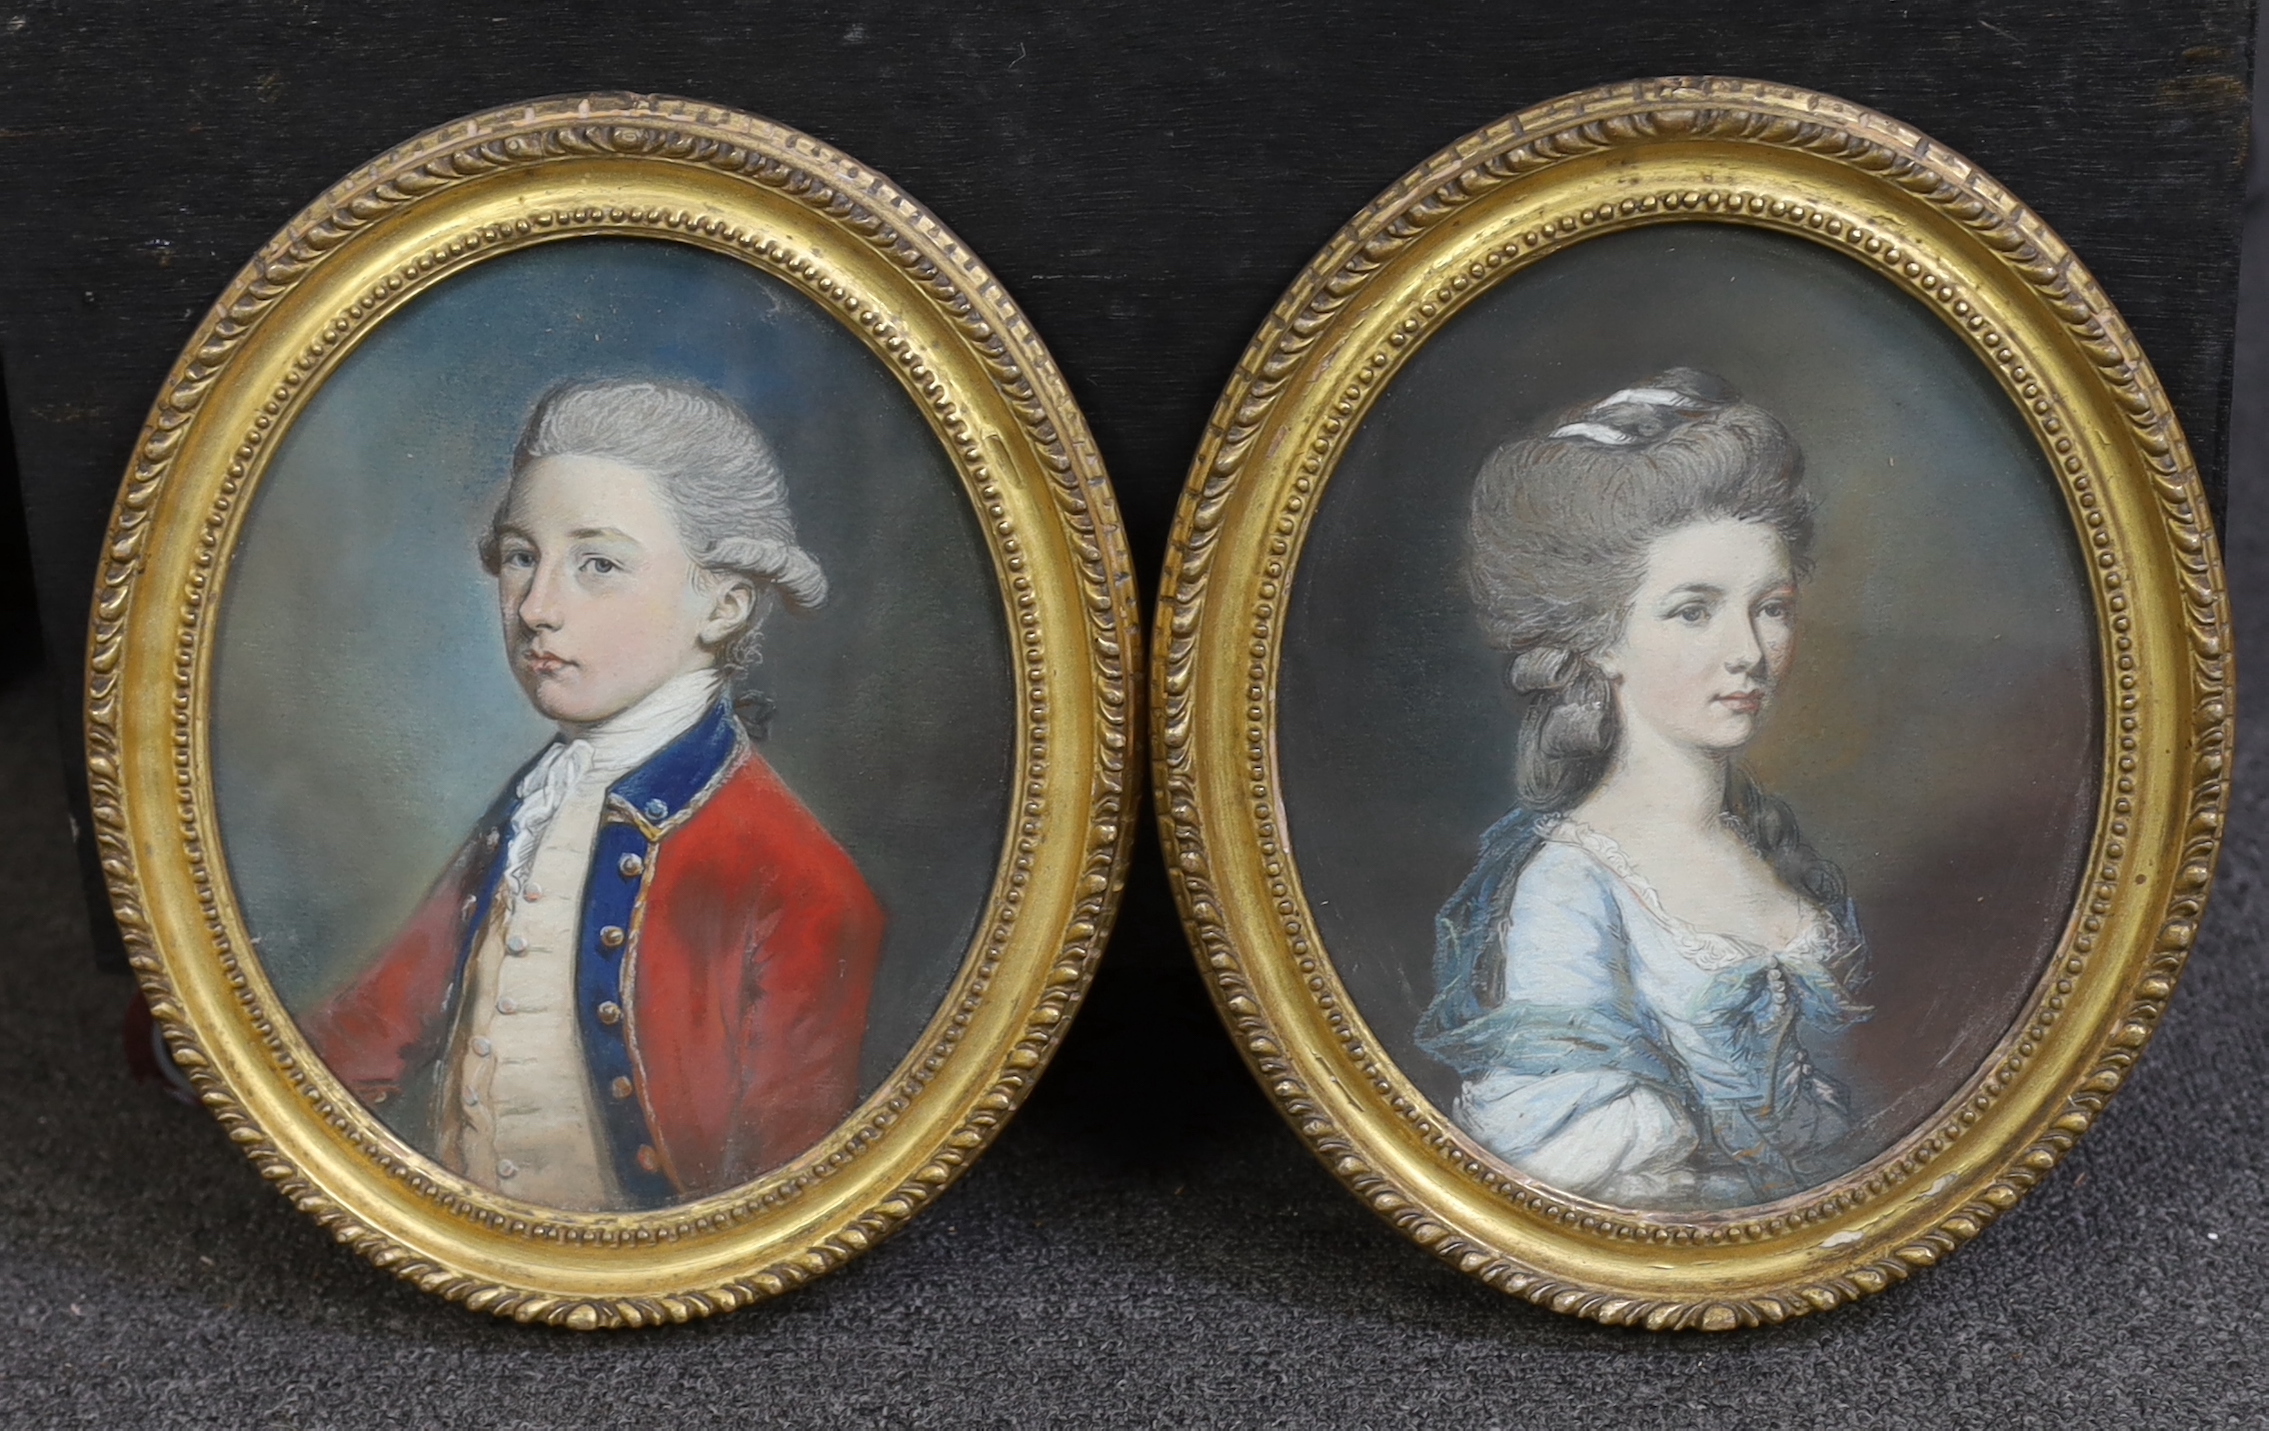 Attributed to John Russell, RA (English, 1745-1806), Portraits of General John Smith (b.1764), 2nd Regiment of Foot Guards, 2nd son of Colonel Smith, and Jane Smith (1765-1858), pastel on paper, a pair, 23 x 18.5cm